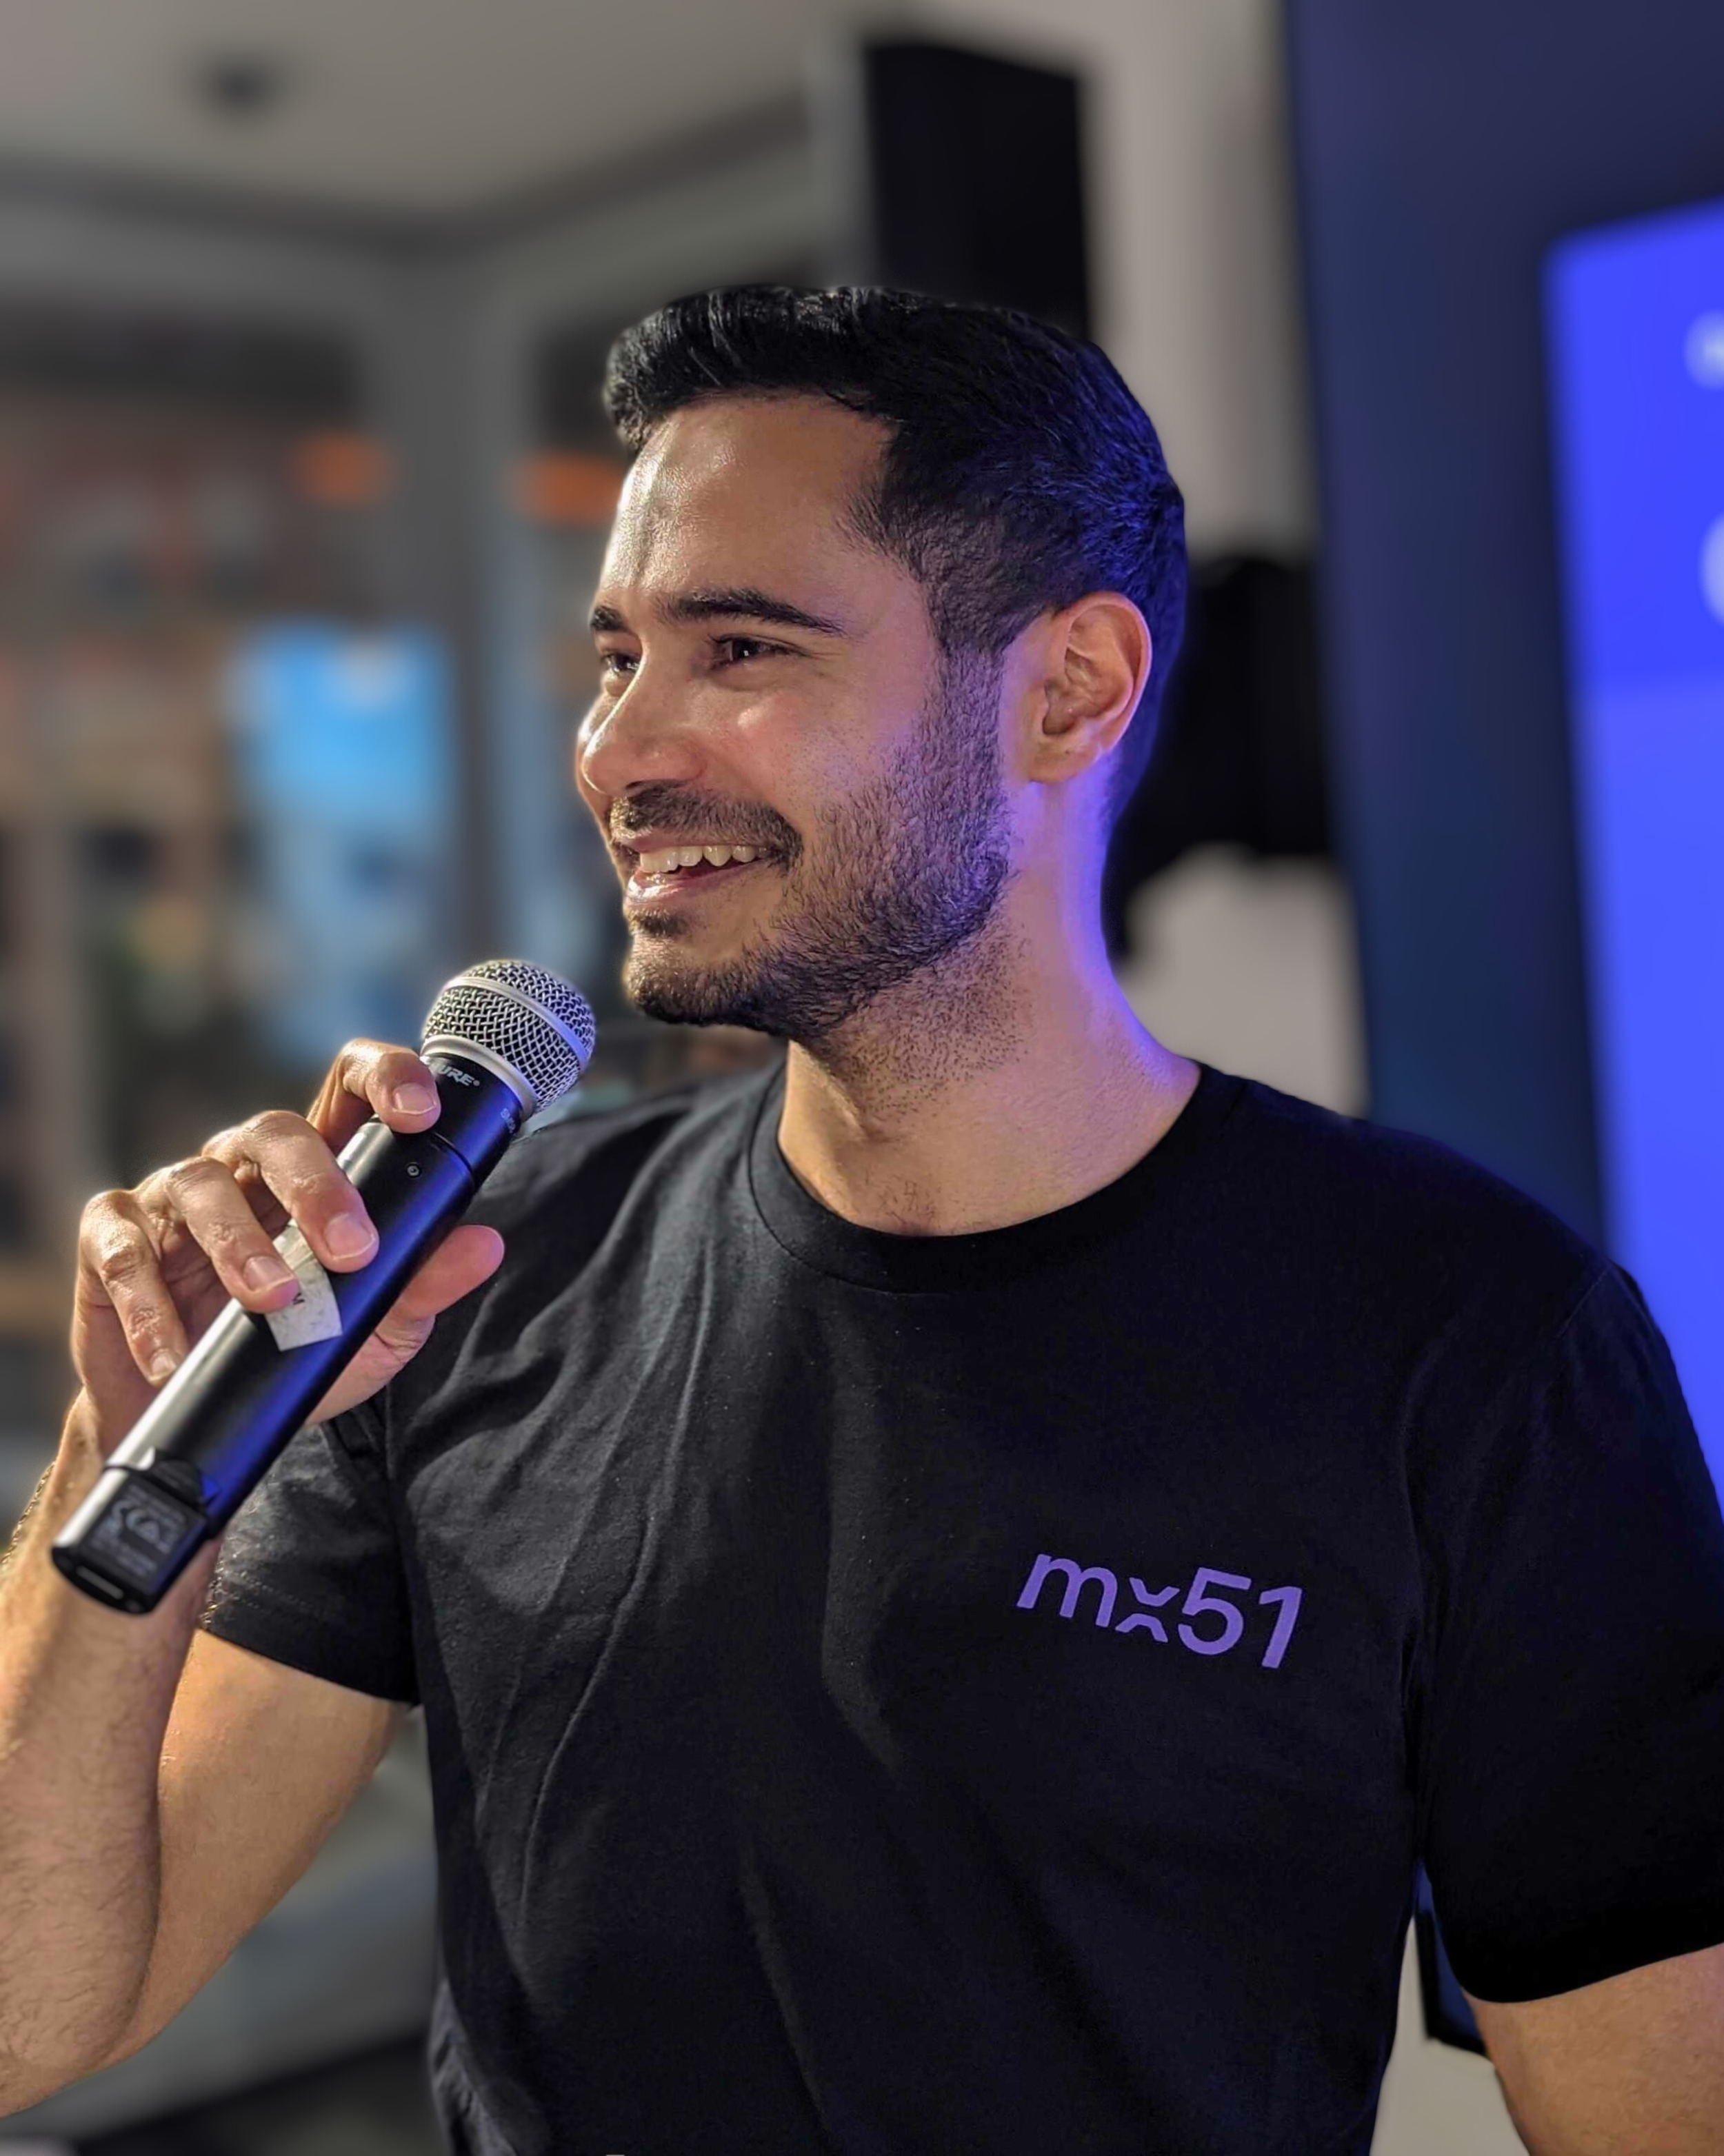 A dark-haired man in an mx51 t-shirt is smiling whilst holding a microphone in front of a presentation.